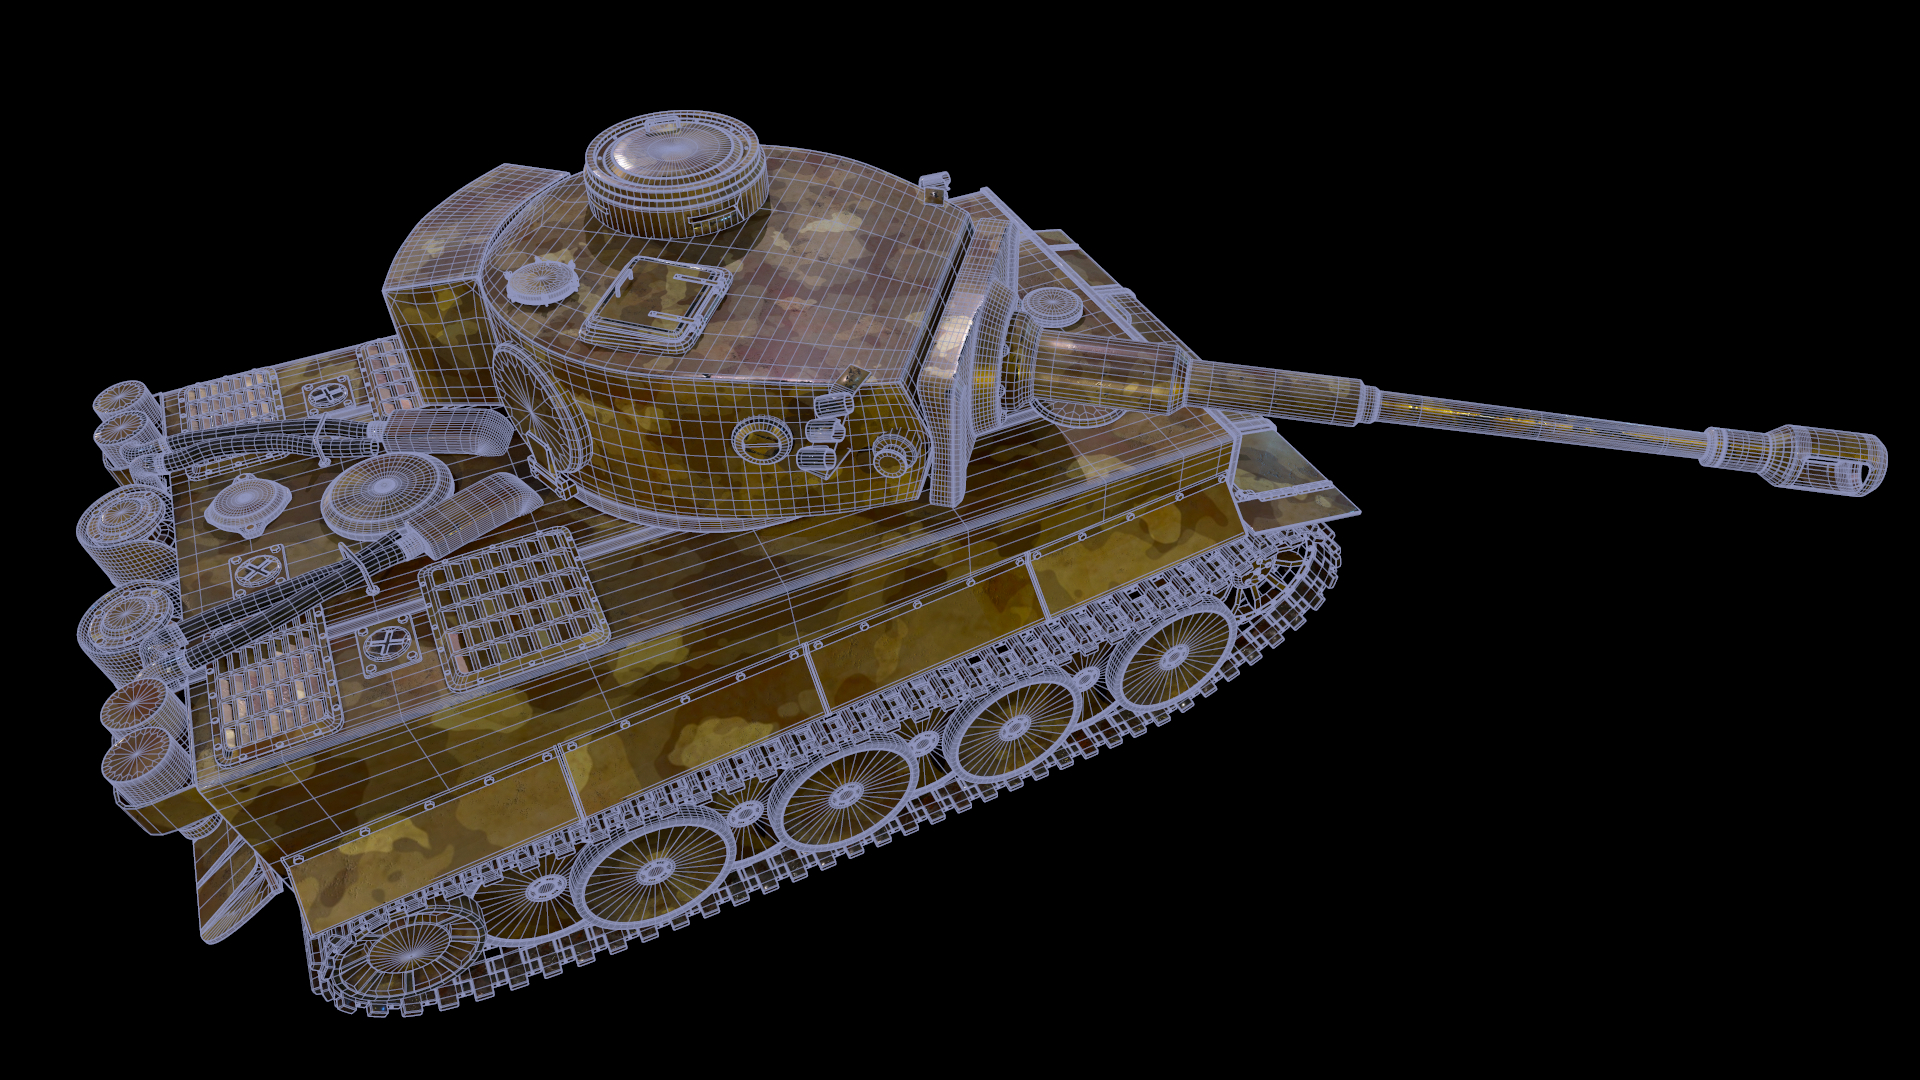 Tank Tiger 1 in 3d max Other image